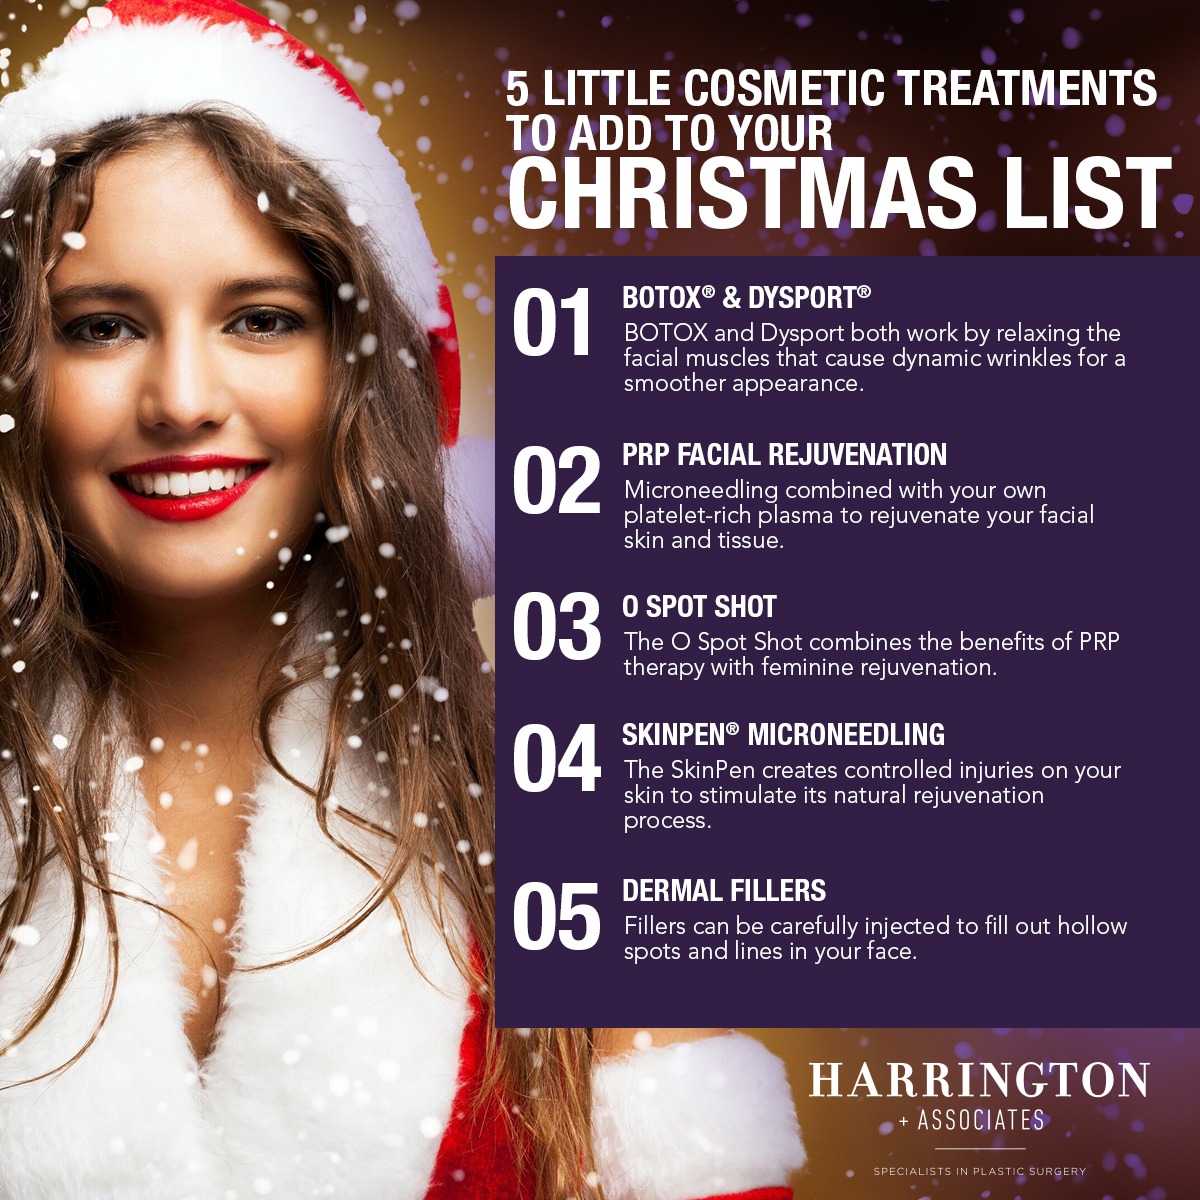 5 Little Cosmetic Treatments To Add To Your Christmas List [Infographic] img 1